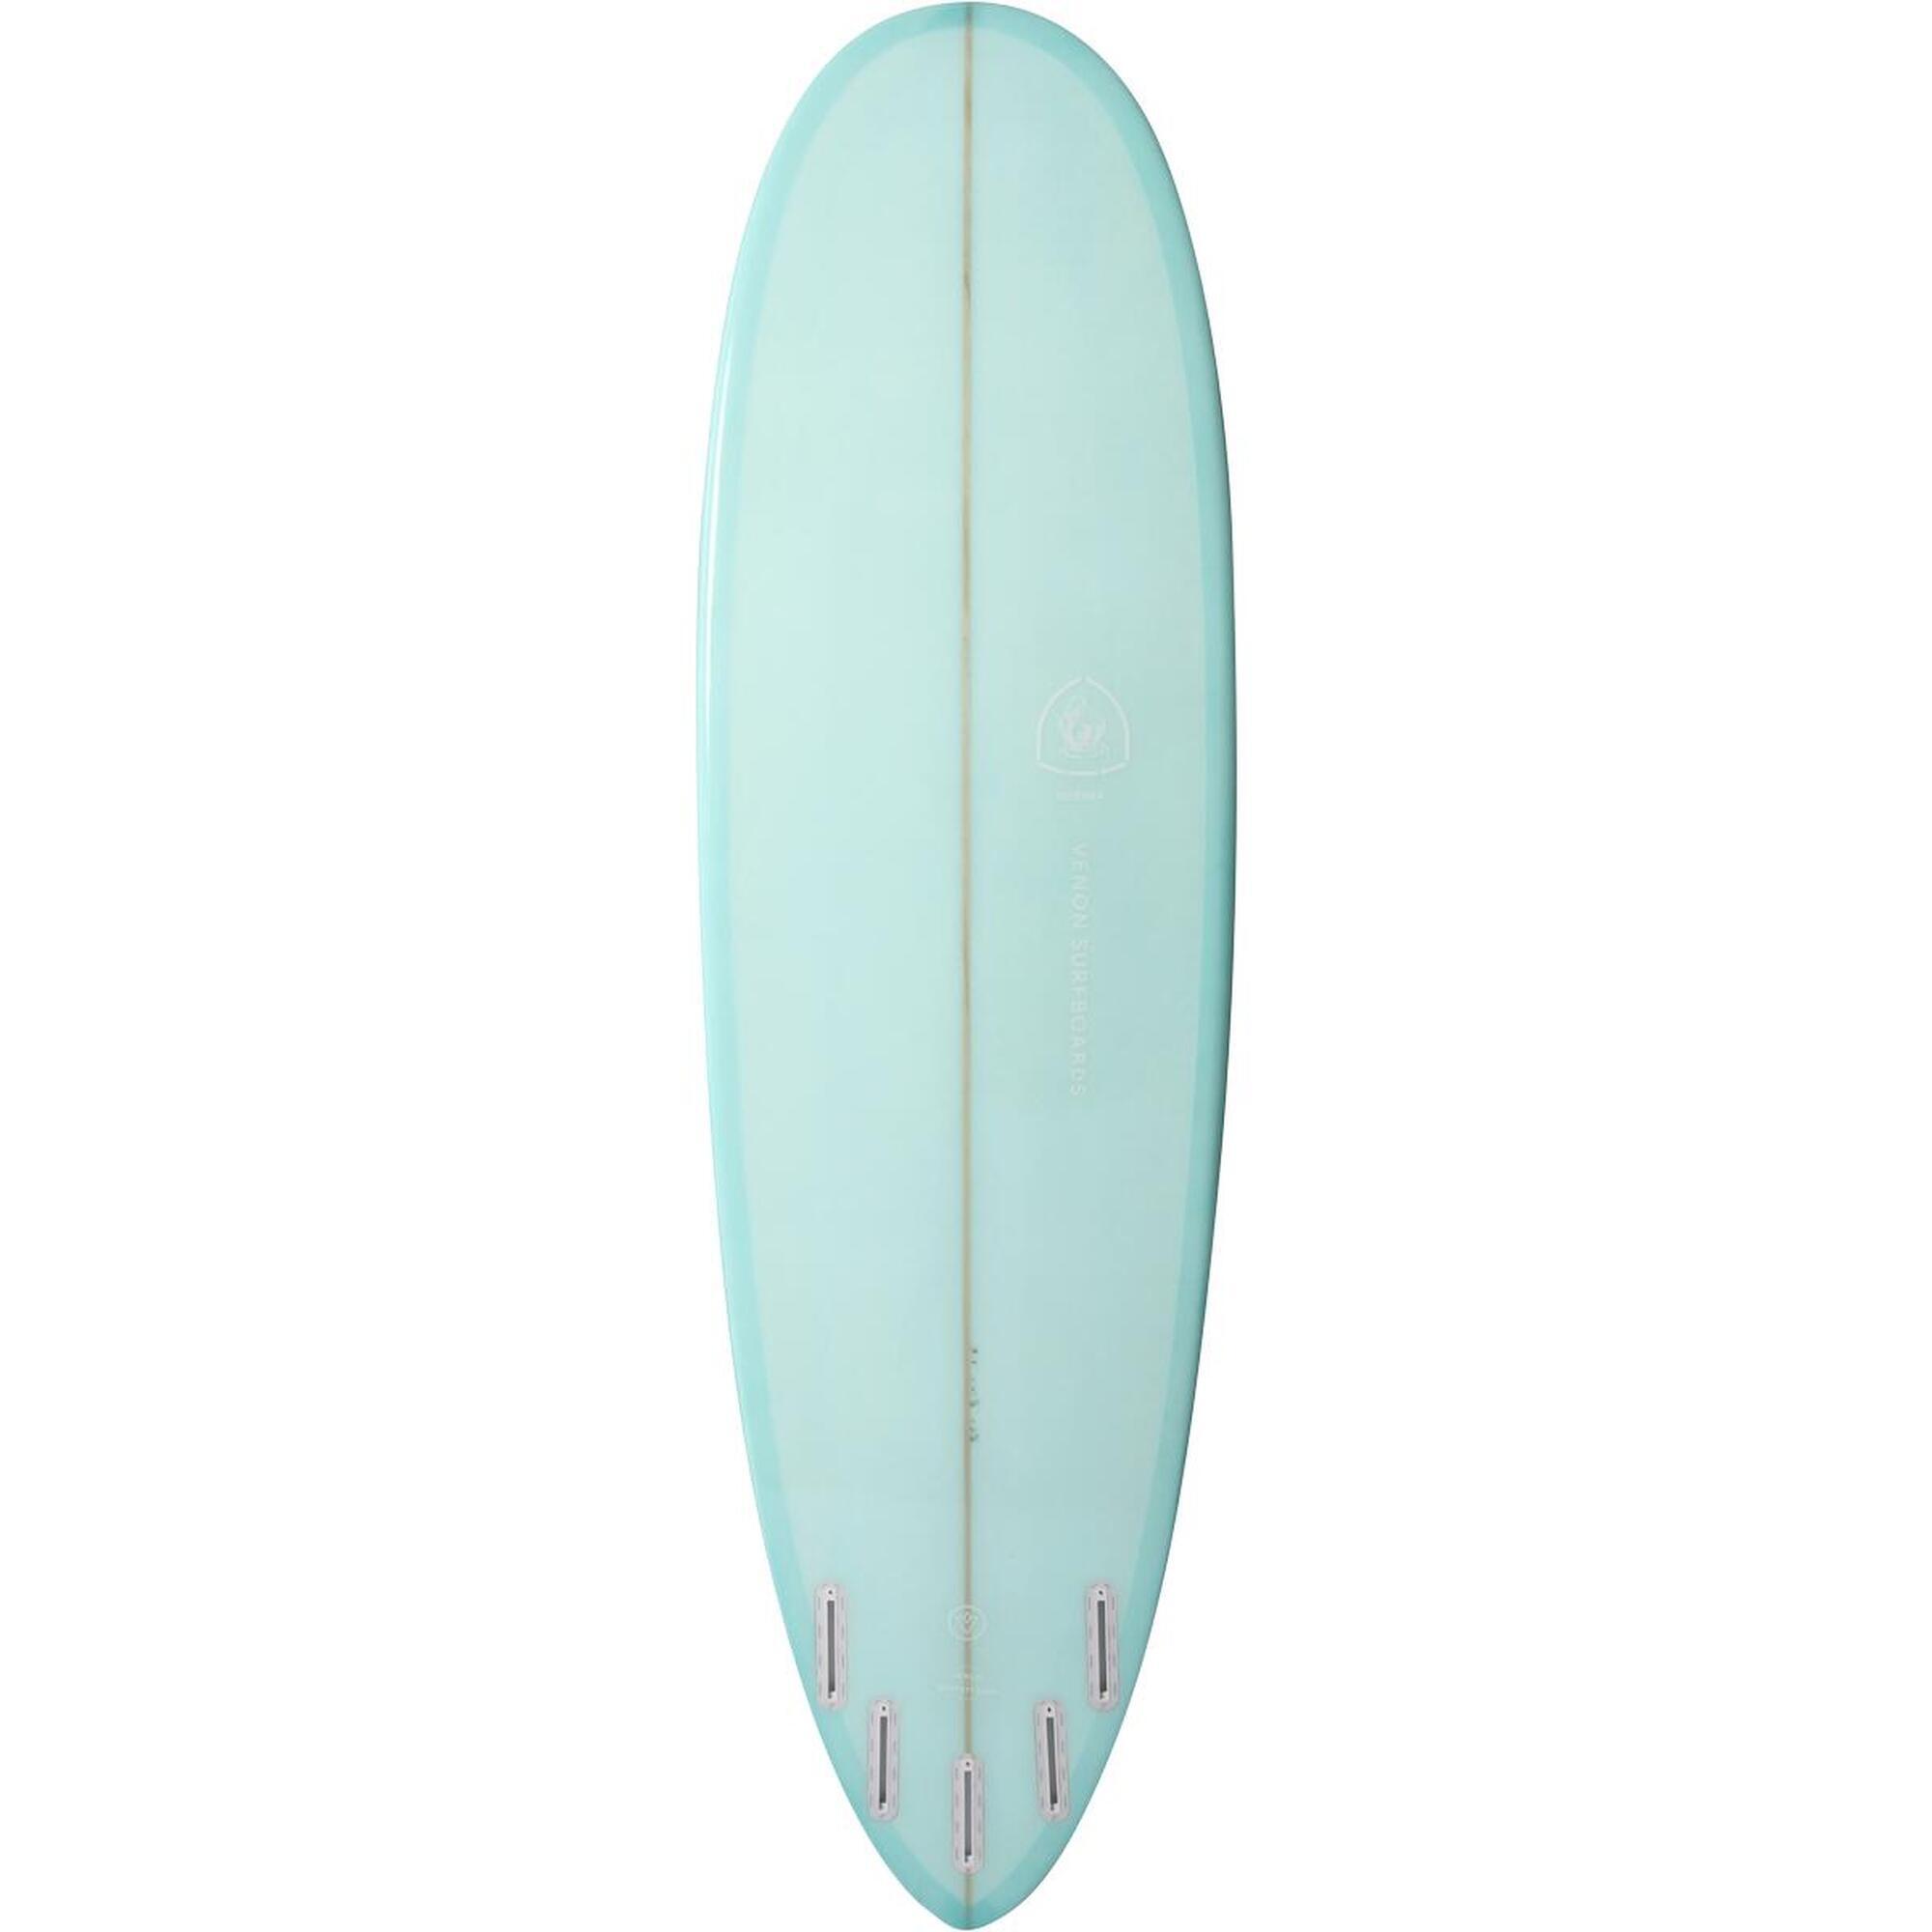 Planche de surf GOPHER Hybrid Pintail Double Layer Teal 6'8"